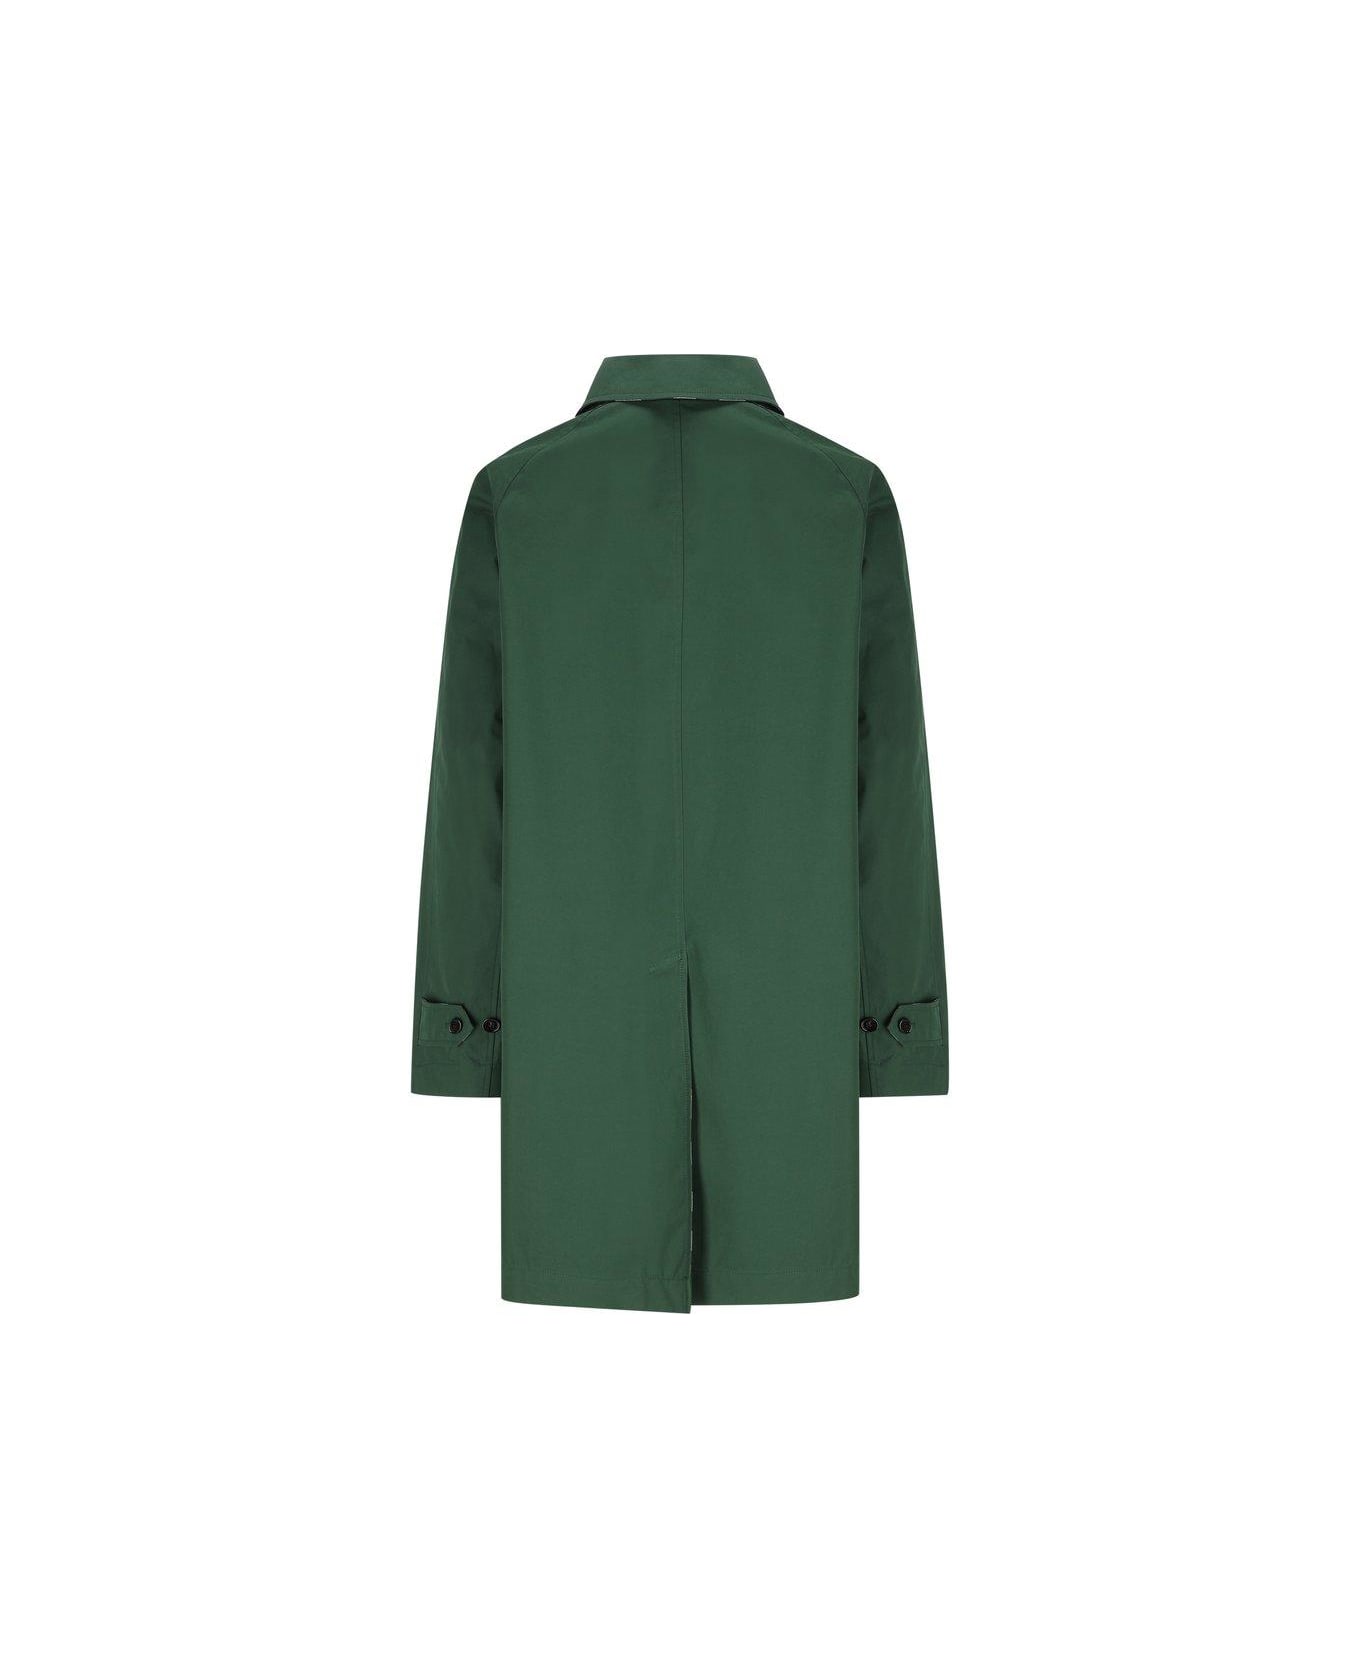 Burberry Reversible Checked Buttoned Car Coat - Green コート